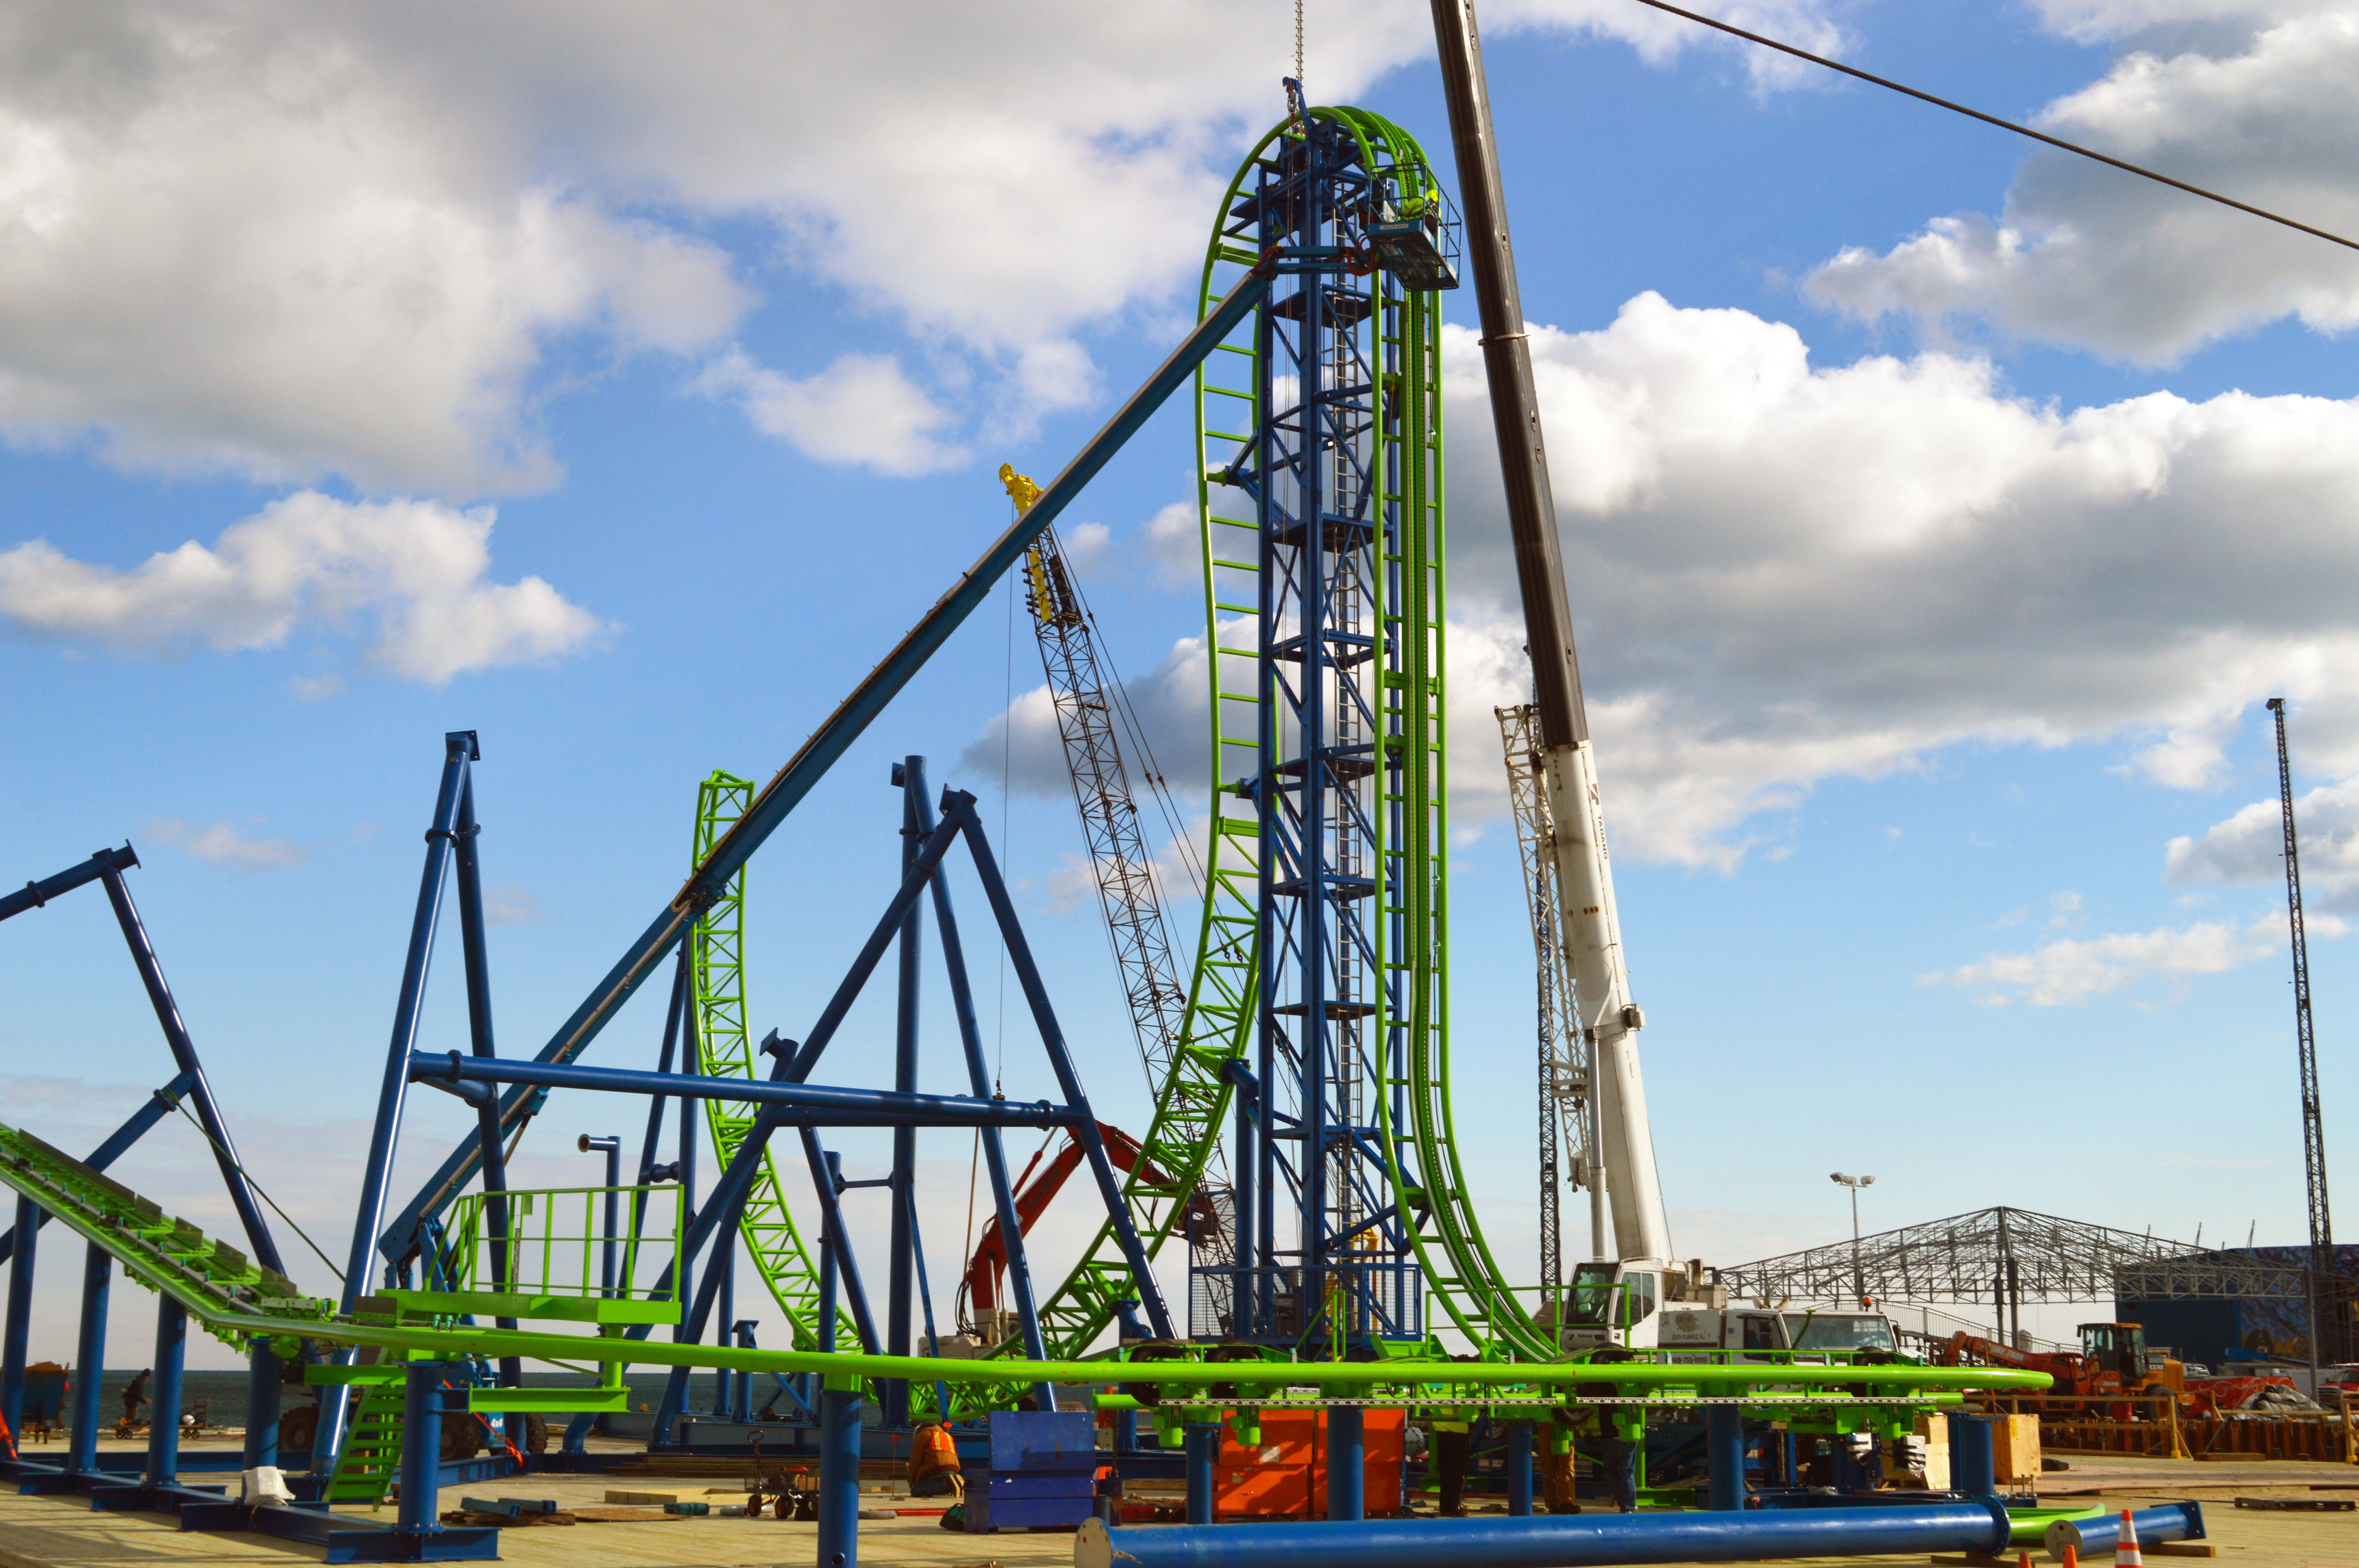 The HYDRUS roller coaster under construction in Seaside Heights. (Photo: Daniel Nee)